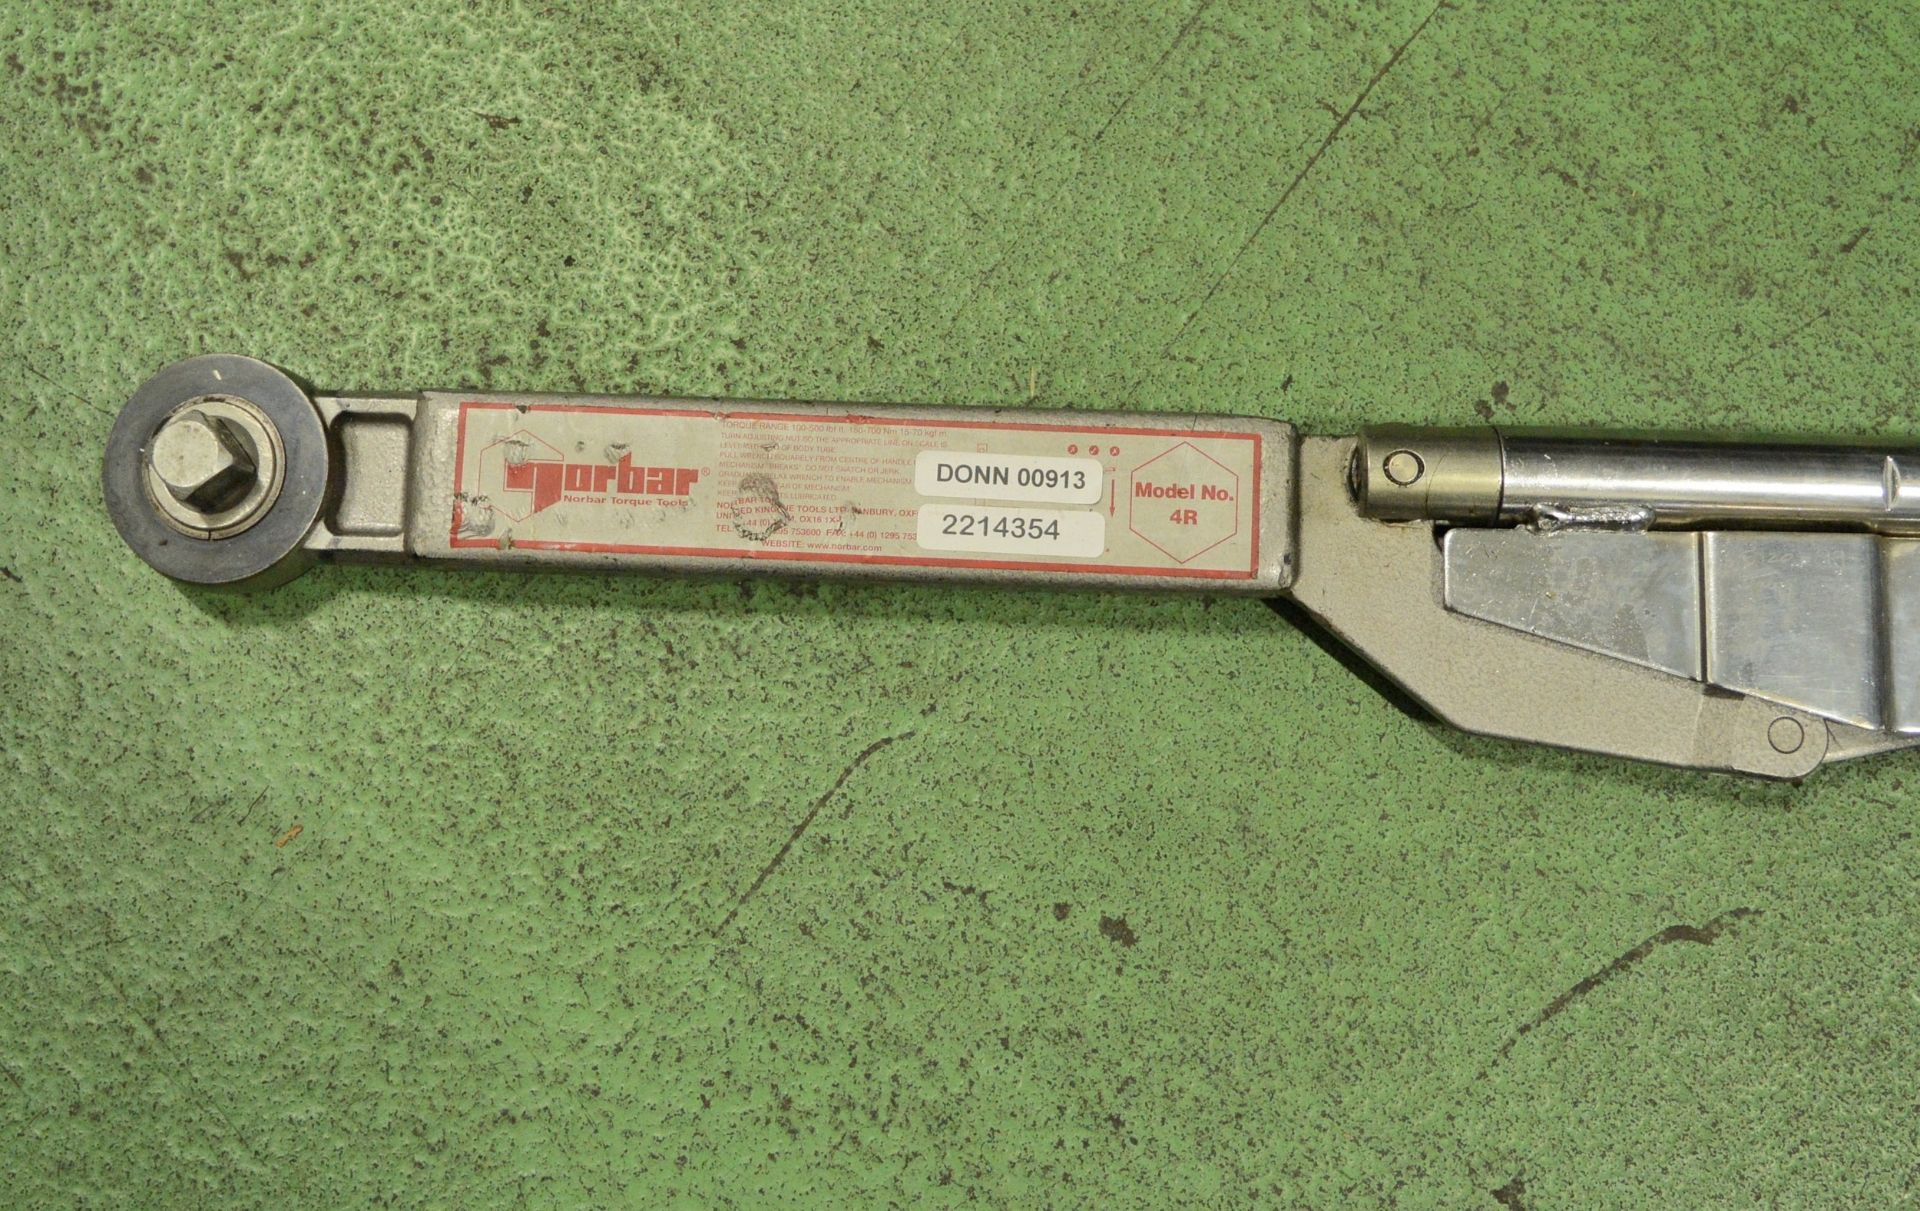 Norbar 4R Torque Wrench 1 inch 150-700Nm - Image 2 of 2